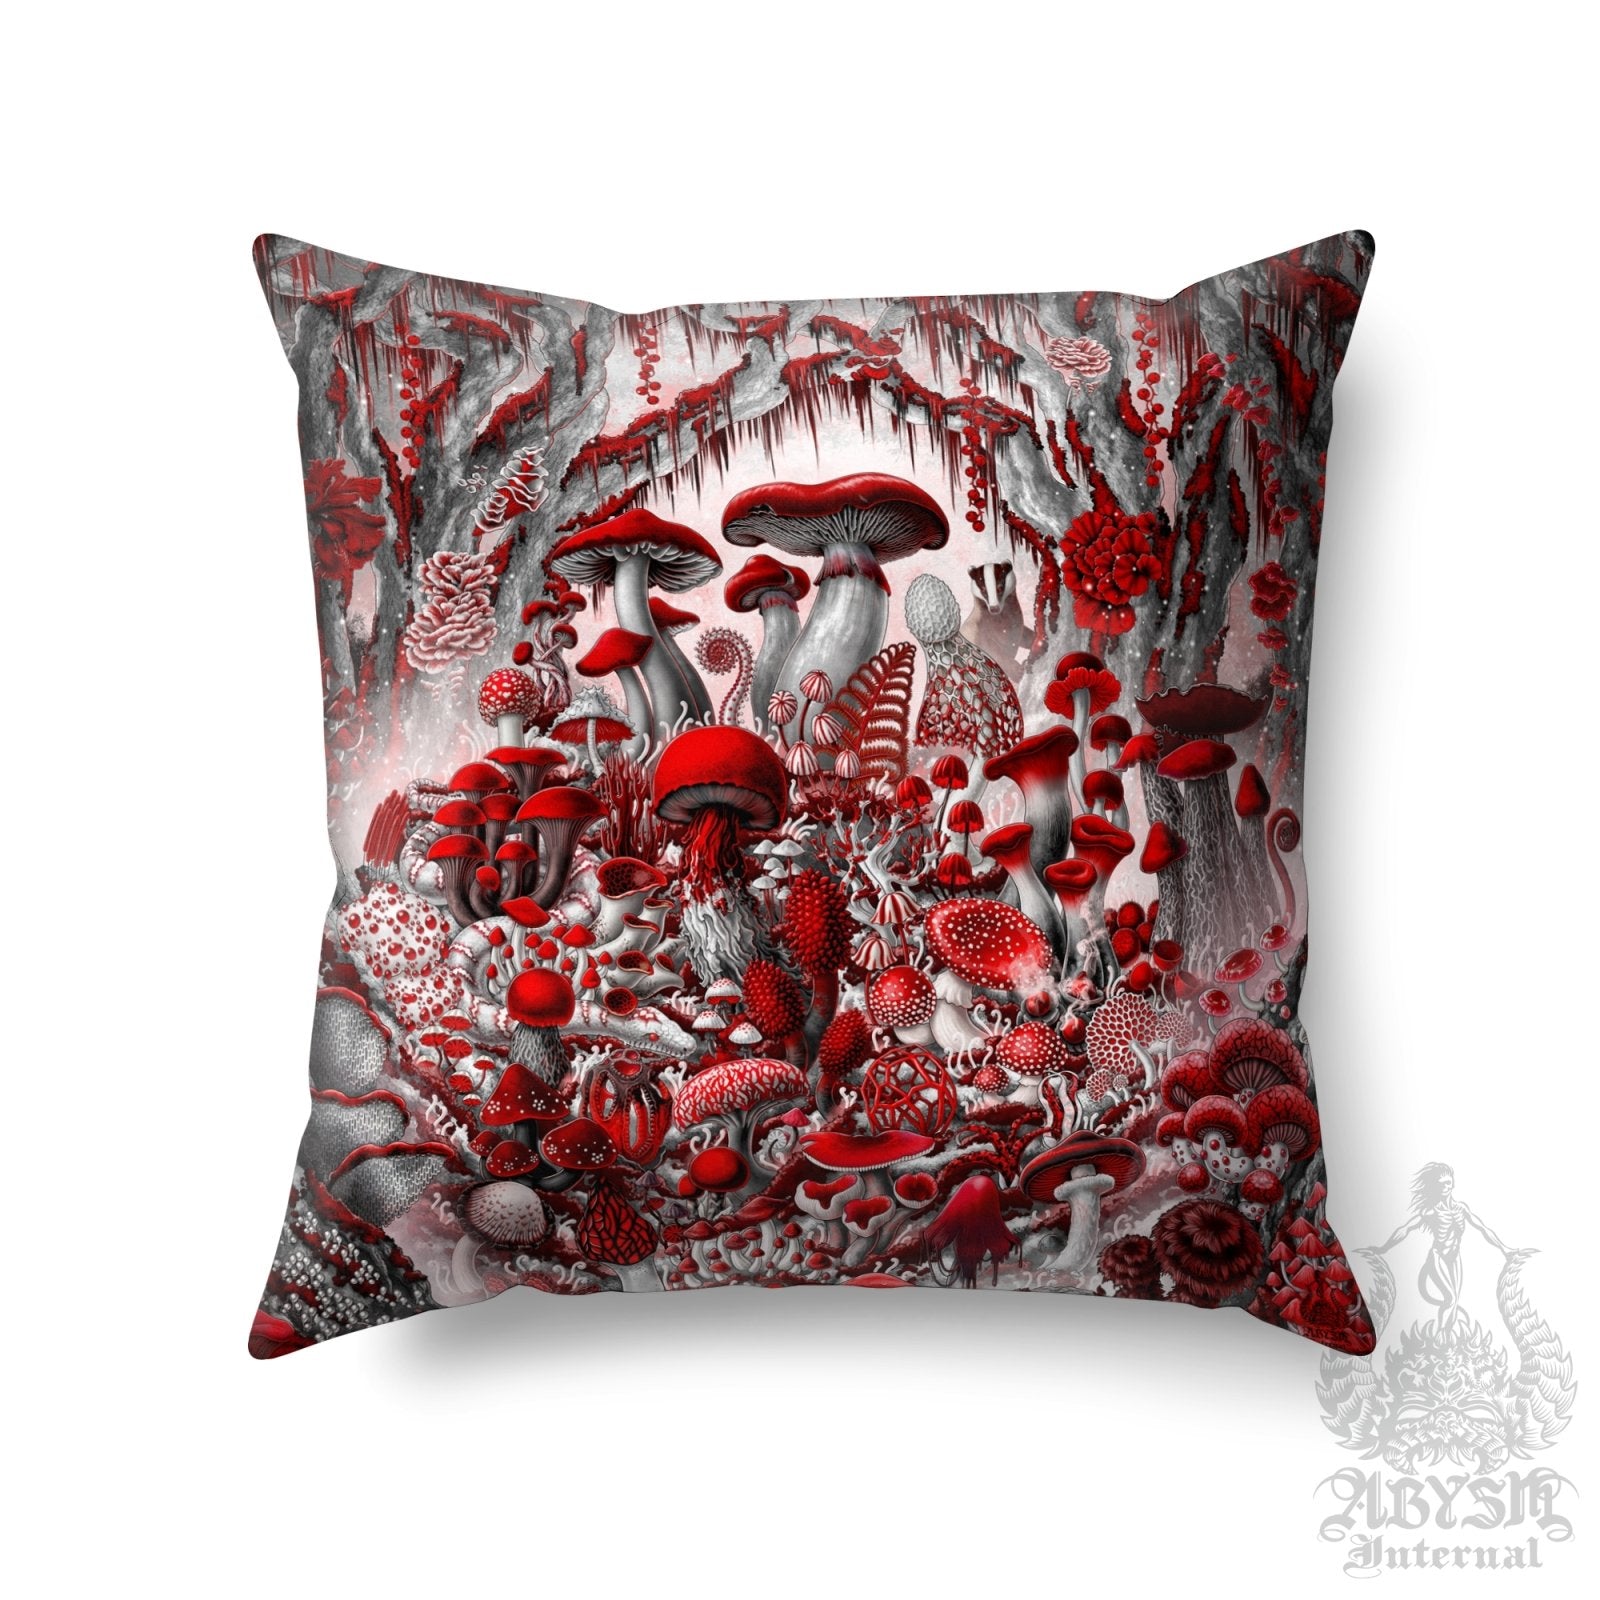 Gothic Mushrooms Throw Pillow, Decorative Accent Cushion, Bloody White Goth Room Decor, Mycology Art Print, Mycologist Gift - Abysm Internal